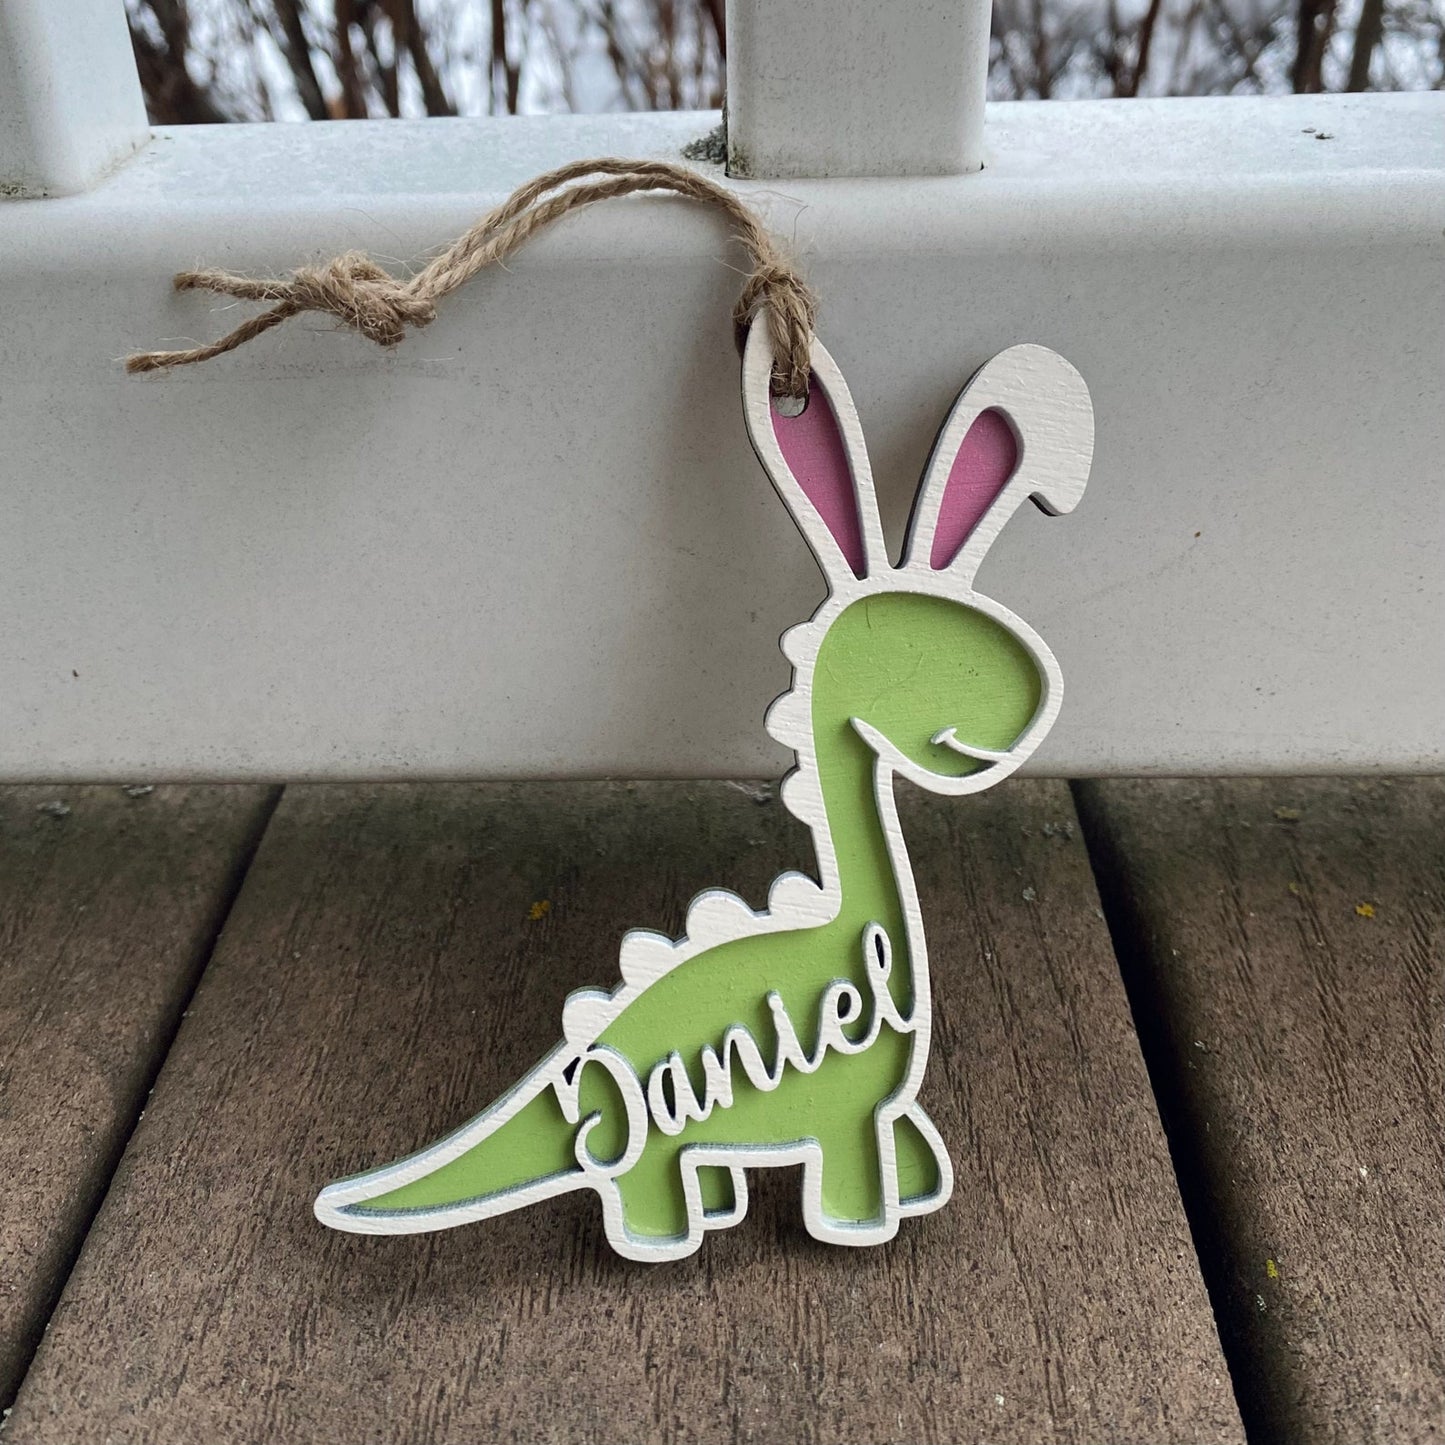 Personalized Dinosaur Easter Basket Tag